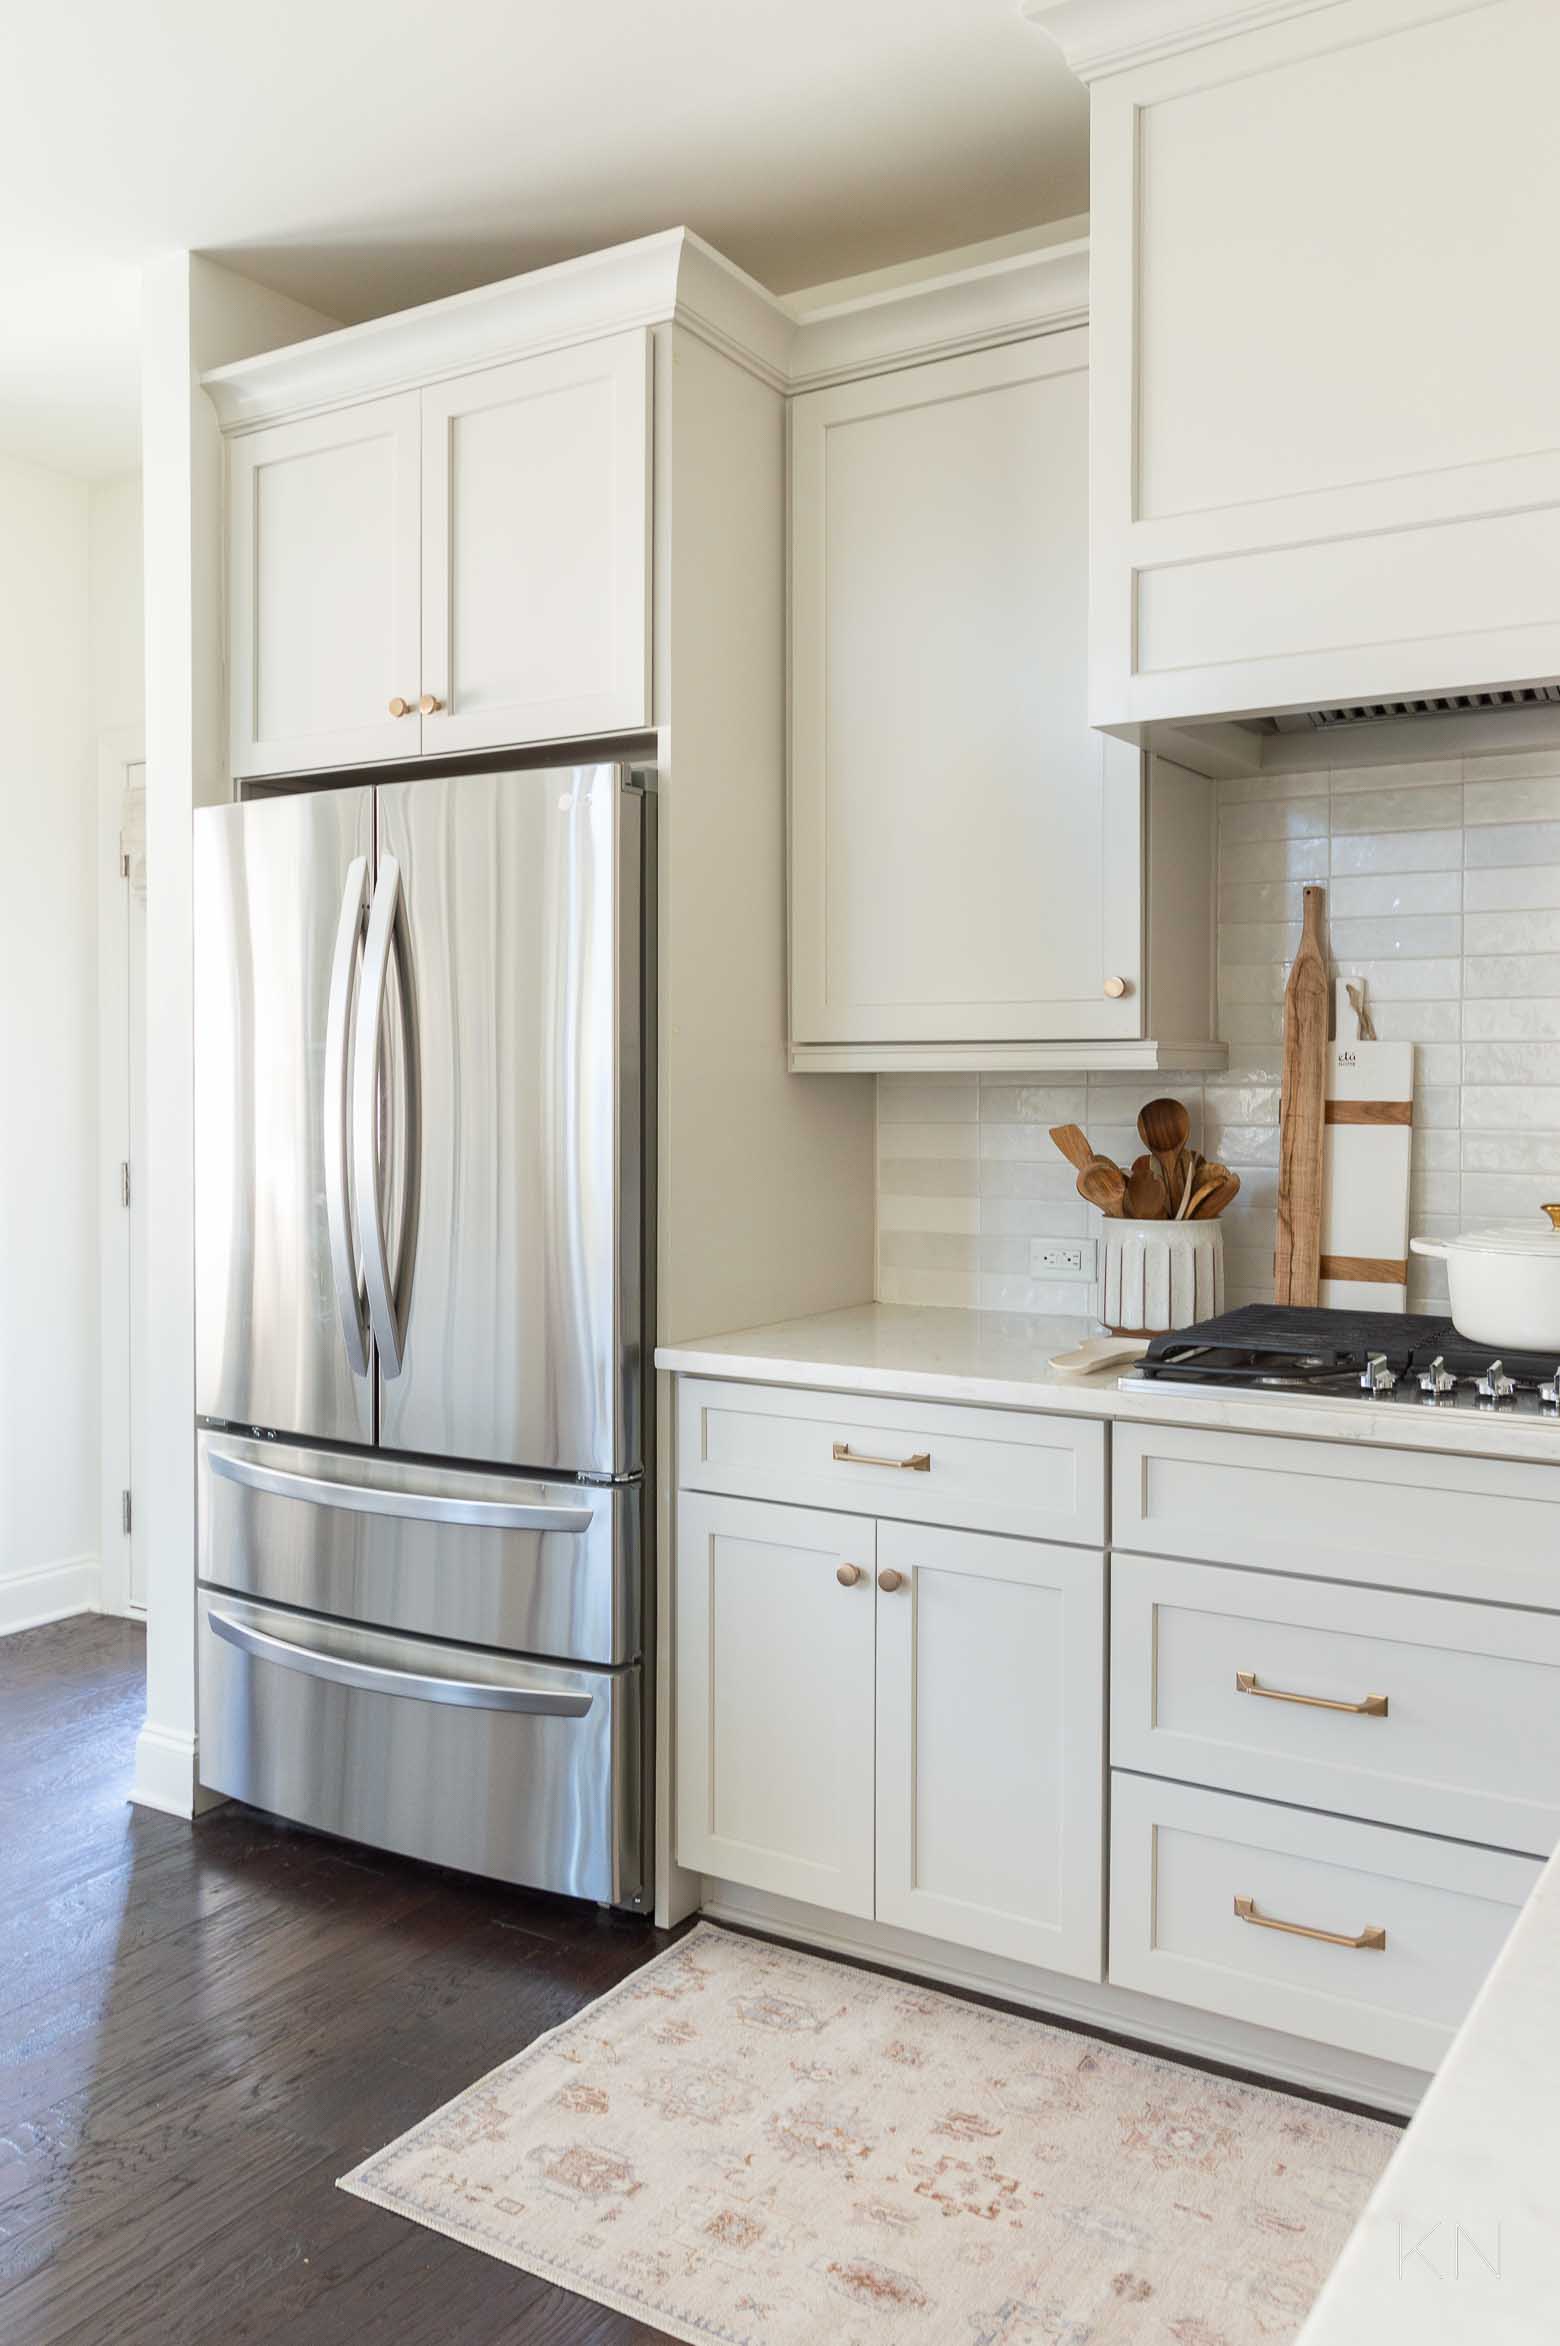 Updating the Kitchen with a Built in Fridge Cabinetry